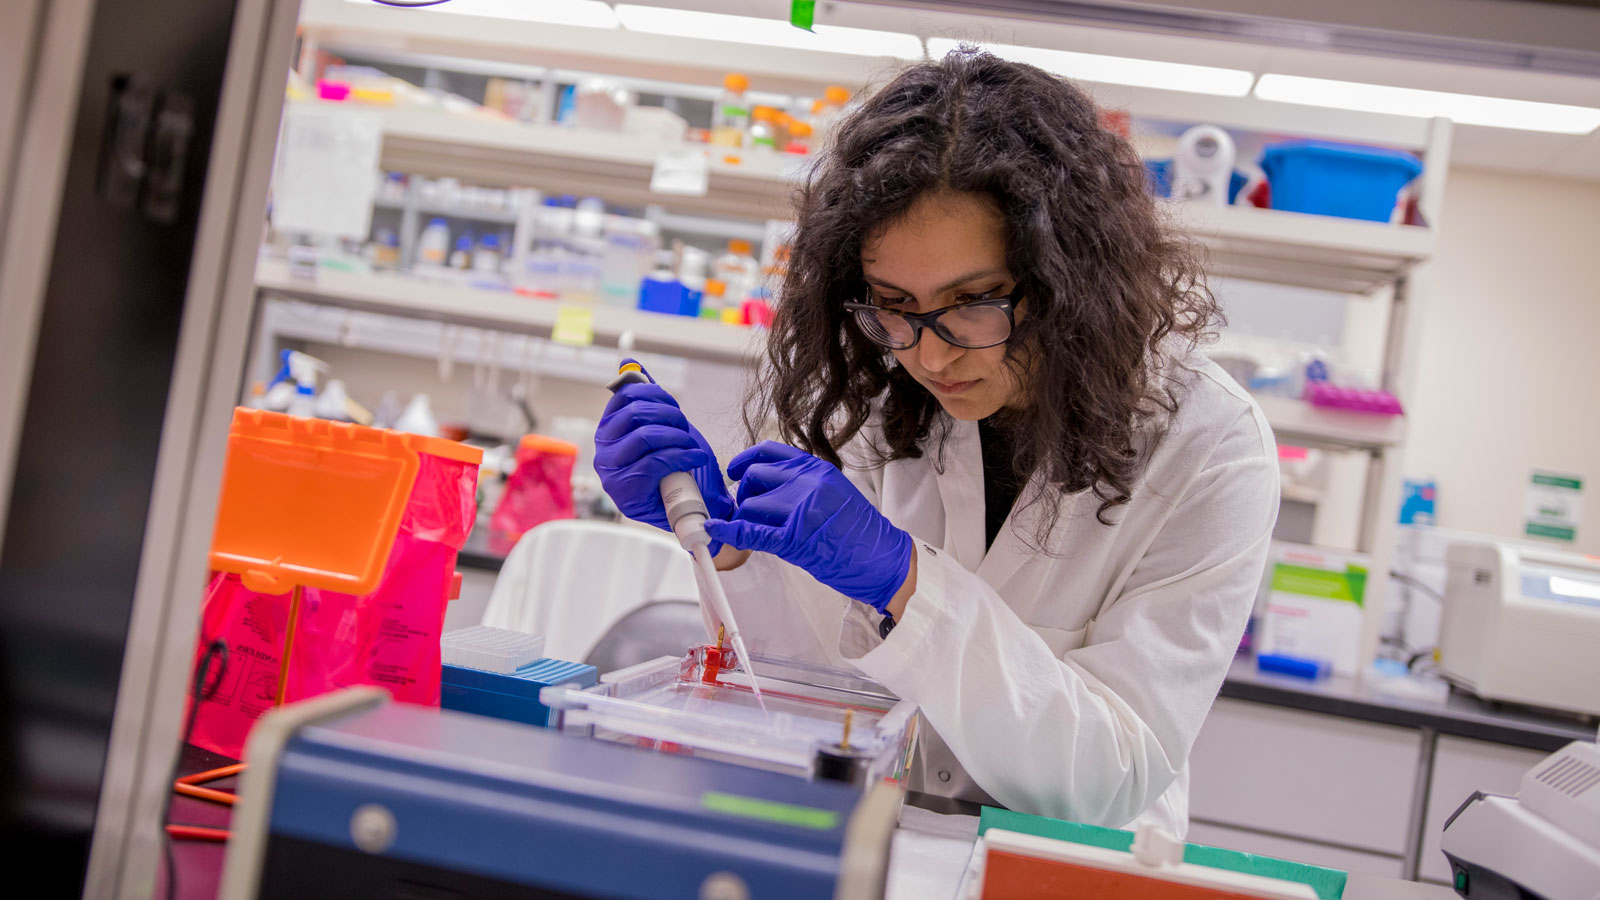 Grand Challenges Scholar Ava Karanjia works on chemical engineering and microbiology research in the lab.